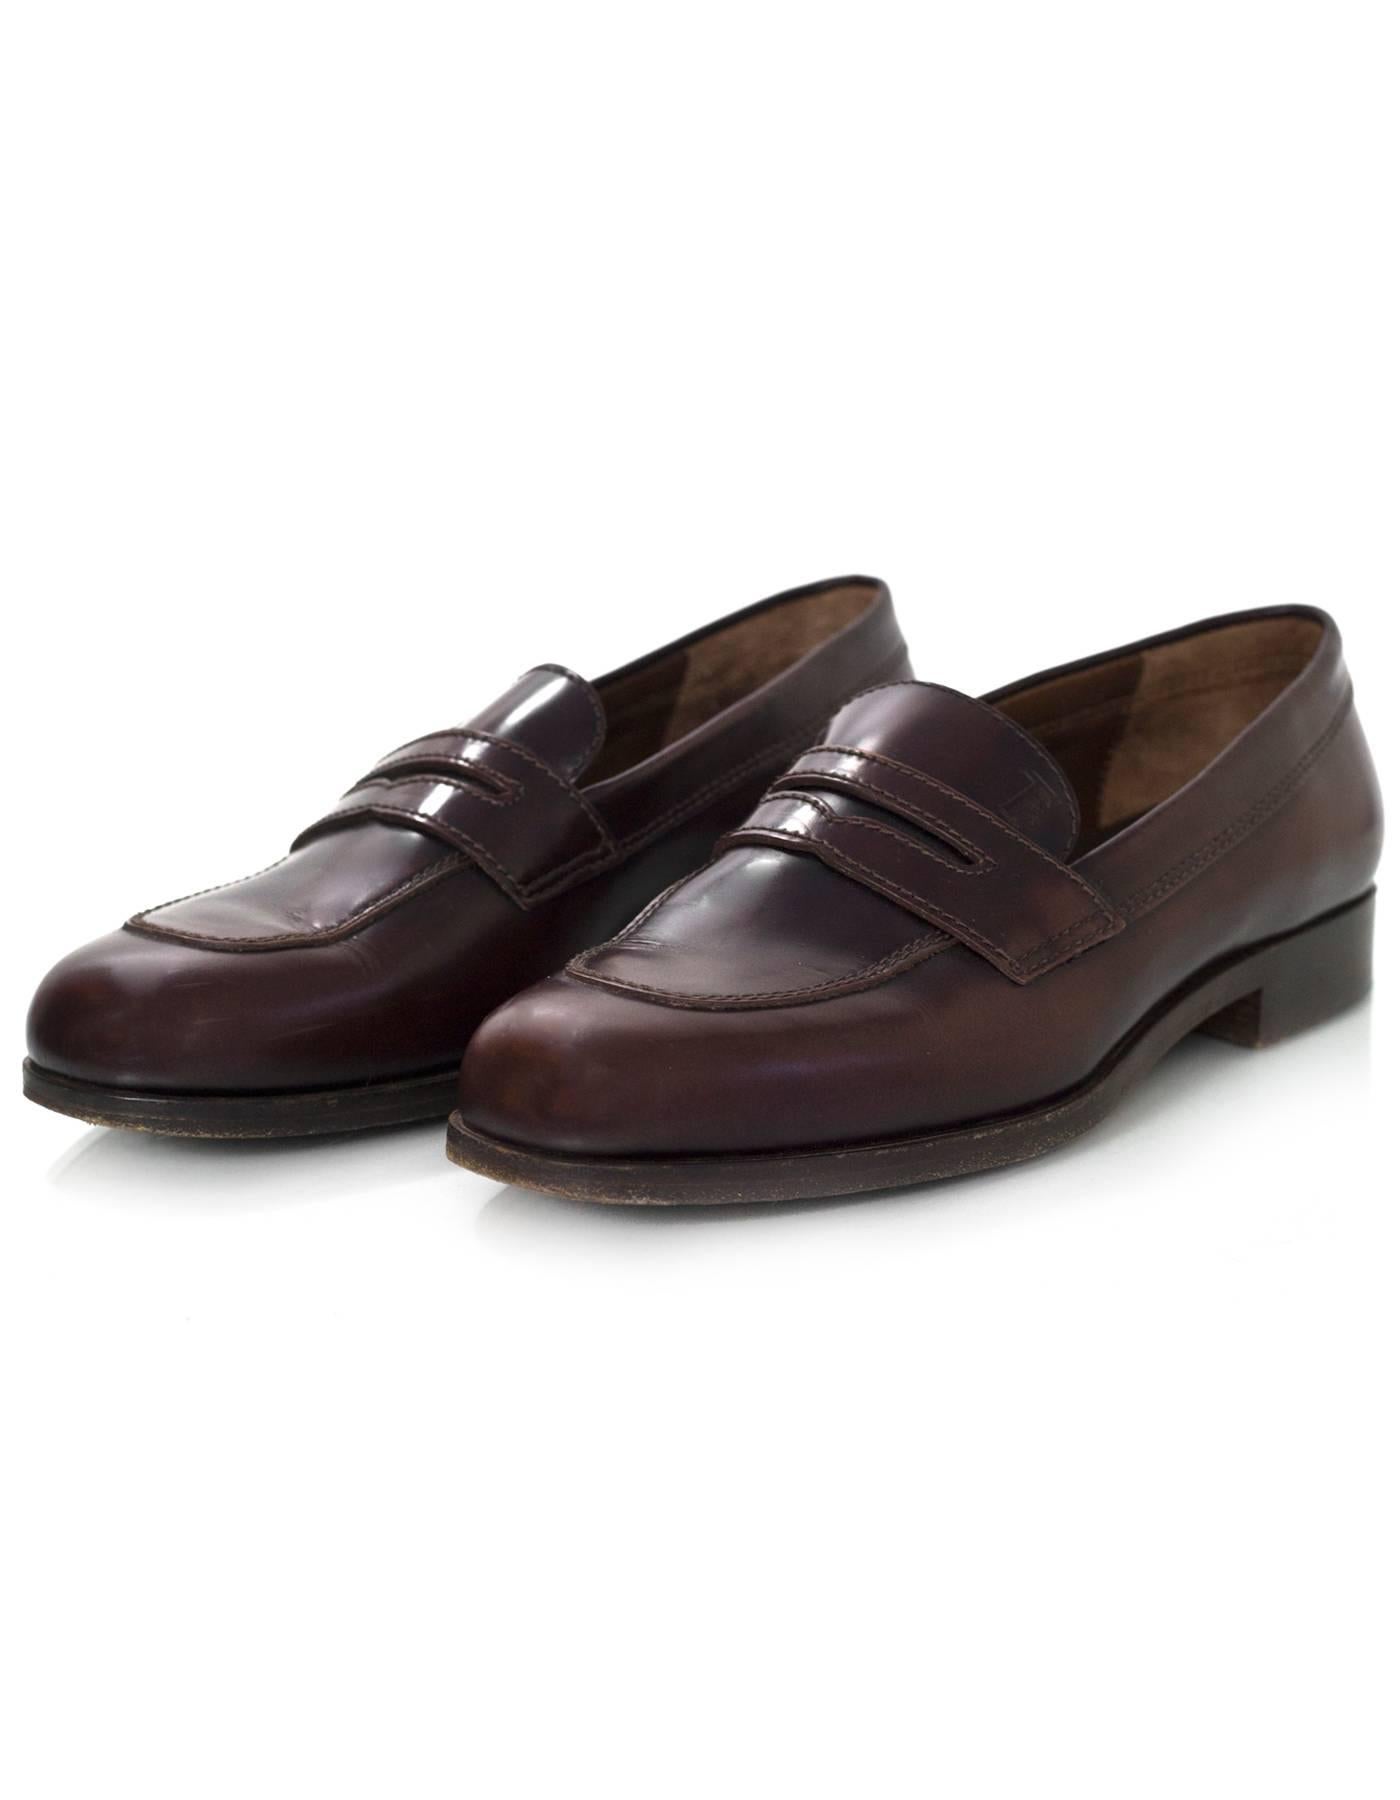 TOD's Brown Leather Loafers Sz 36.5

Made In: Italy
Color: Brown
Materials: Leather
Closure/Opening: Slide on
Sole Stamp: TODS
Overall Condition: Very good pre-owned condition with the exception of light creasing and wear at outsoles.  Light wear to